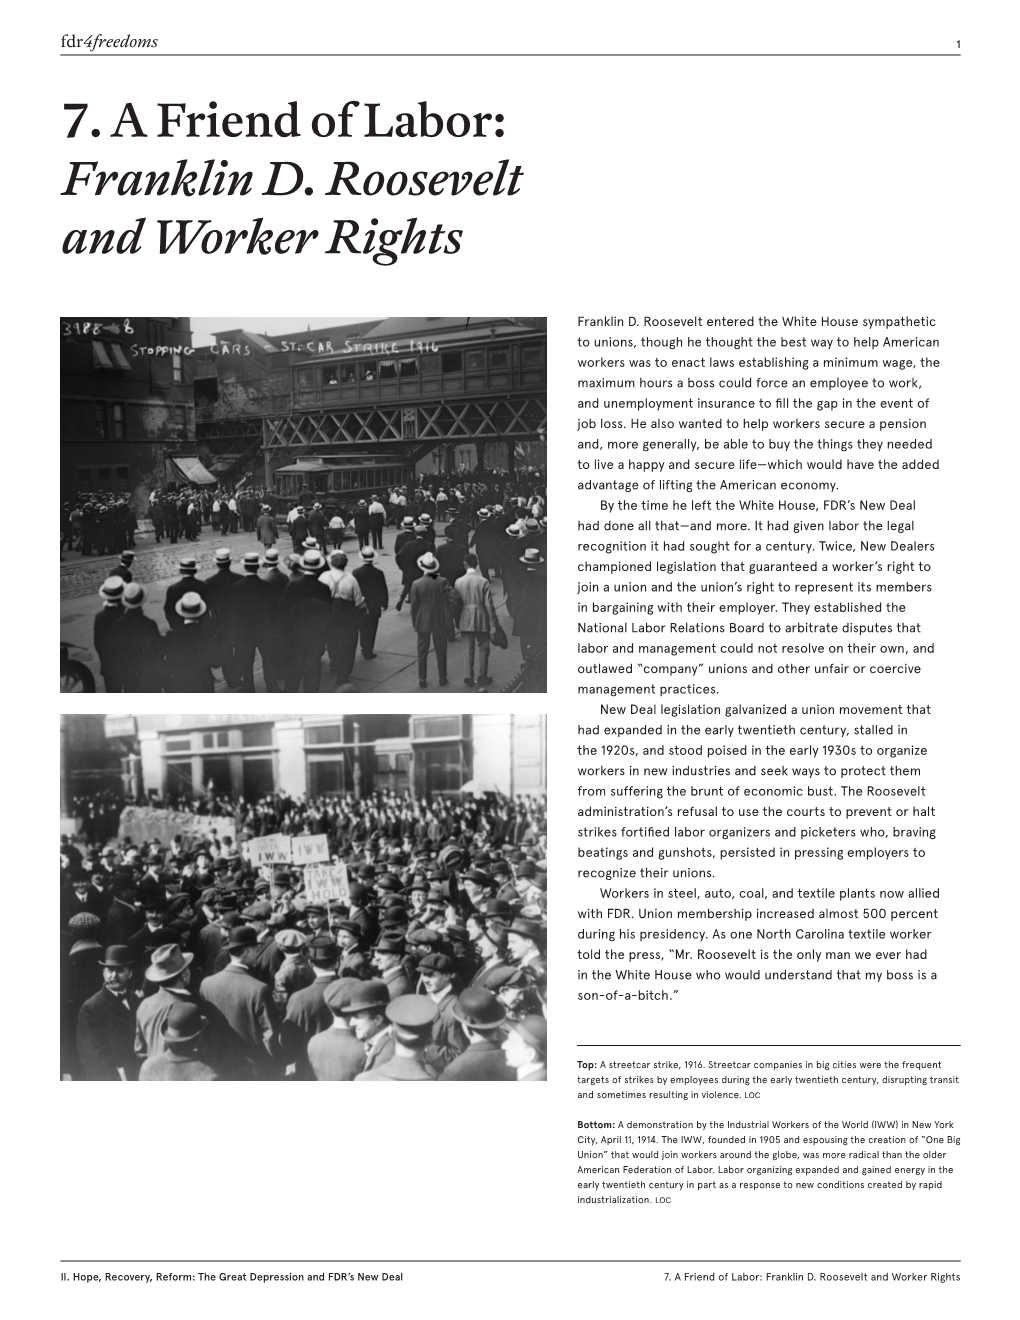 7. a Friend of Labor: Franklin D. Roosevelt and Worker Rights